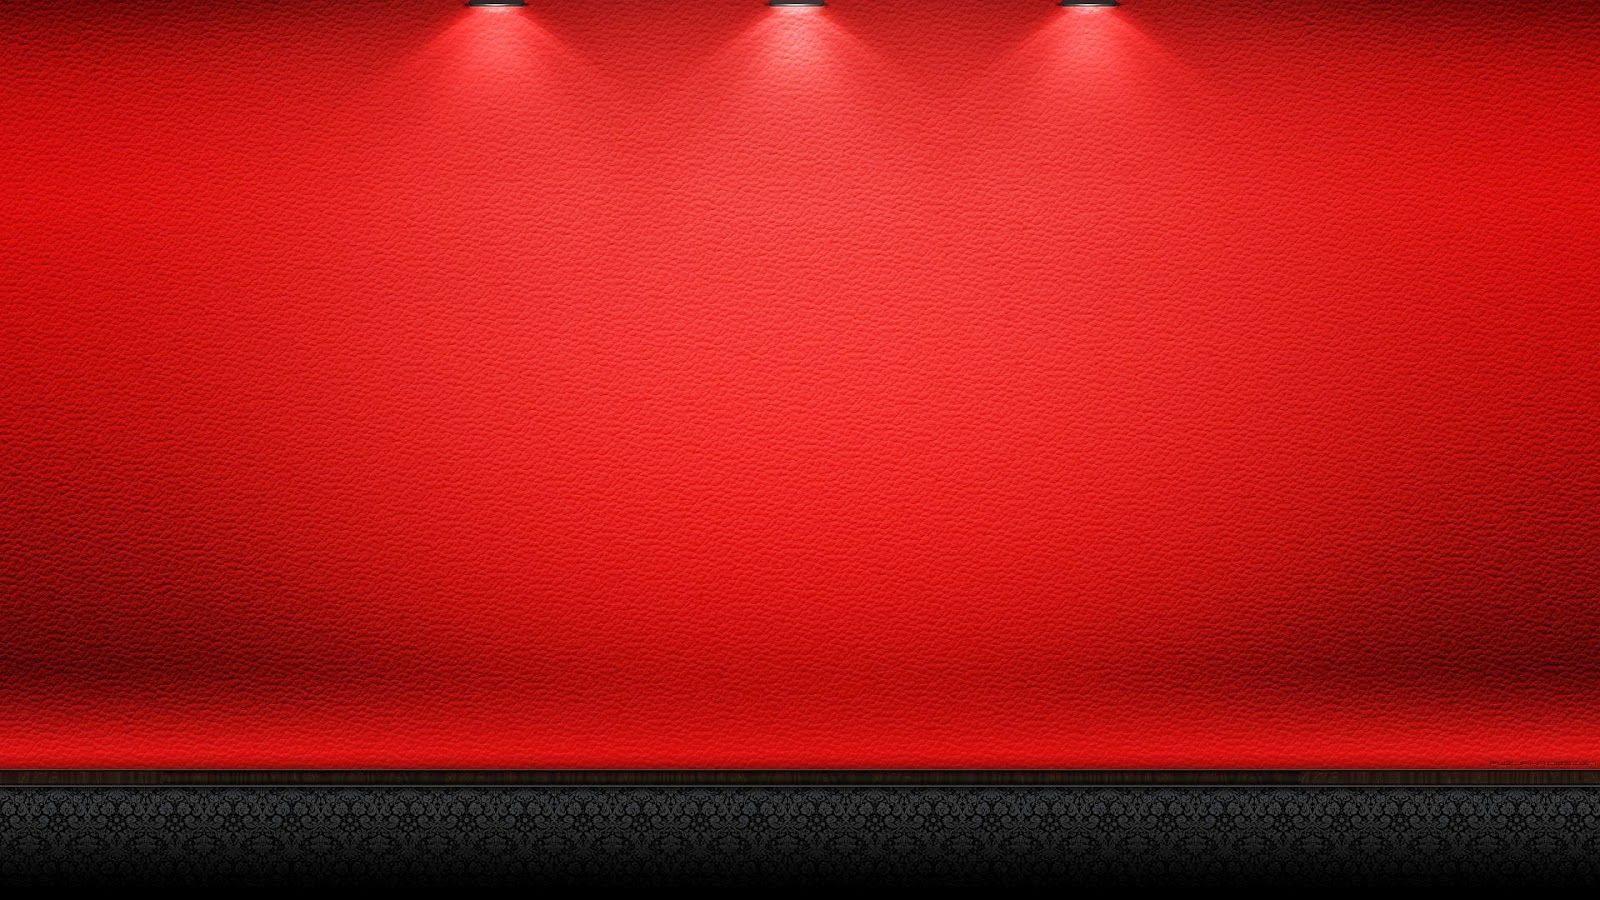 Red And White Aesthetic Wallpapers  PixelsTalkNet